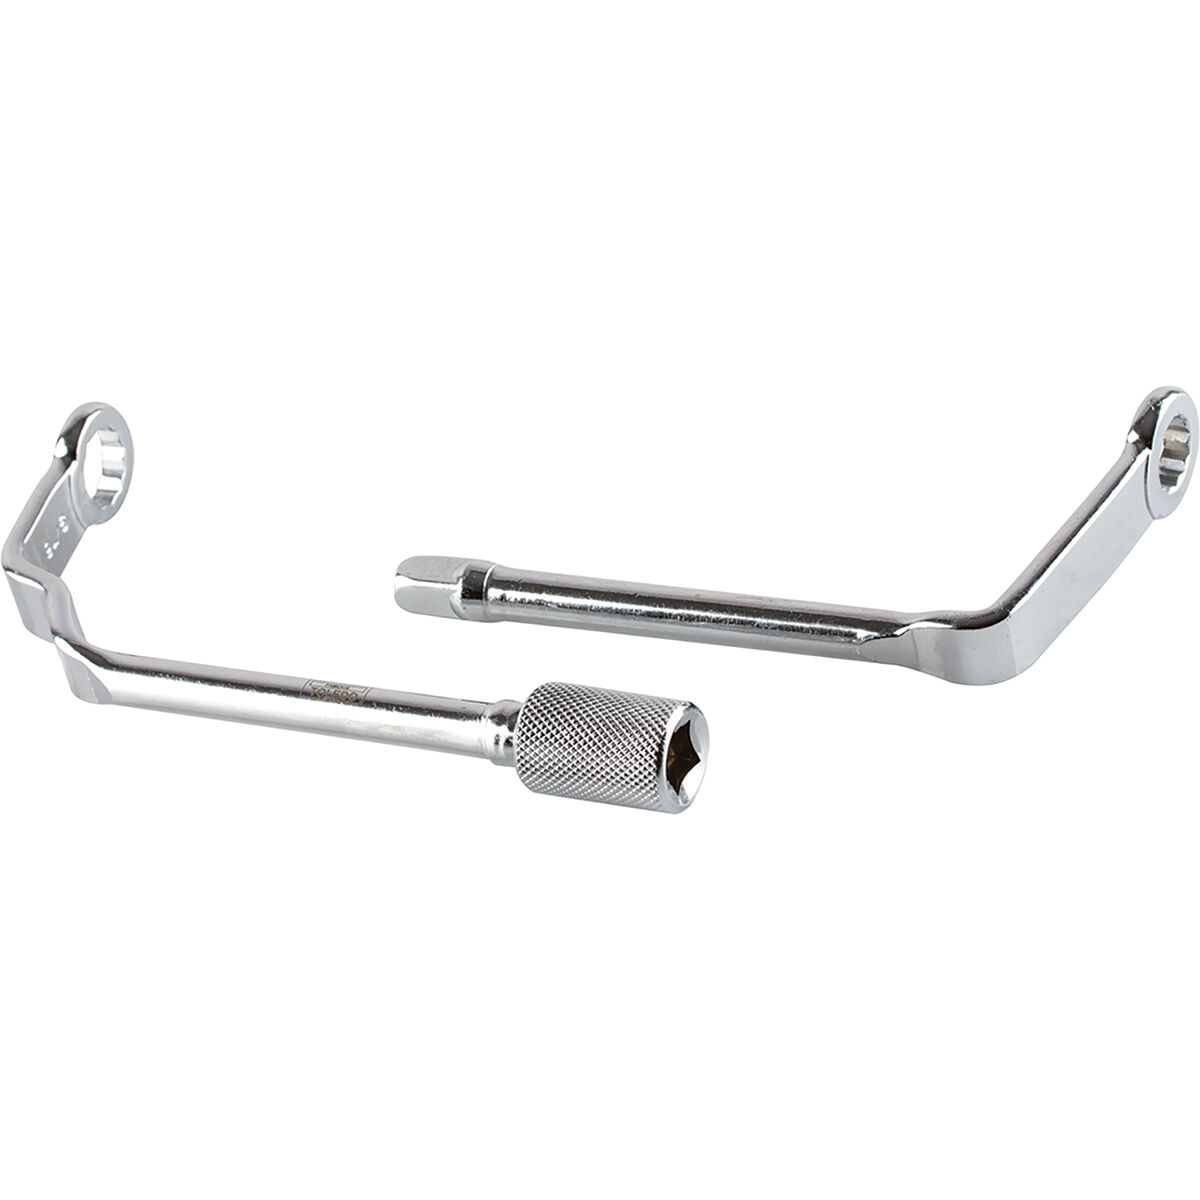 OFFSET DISTRIBUTOR CLAMP WRENCHES TOLEDO 302173 LOCK NUT DOUBLE ENDED 